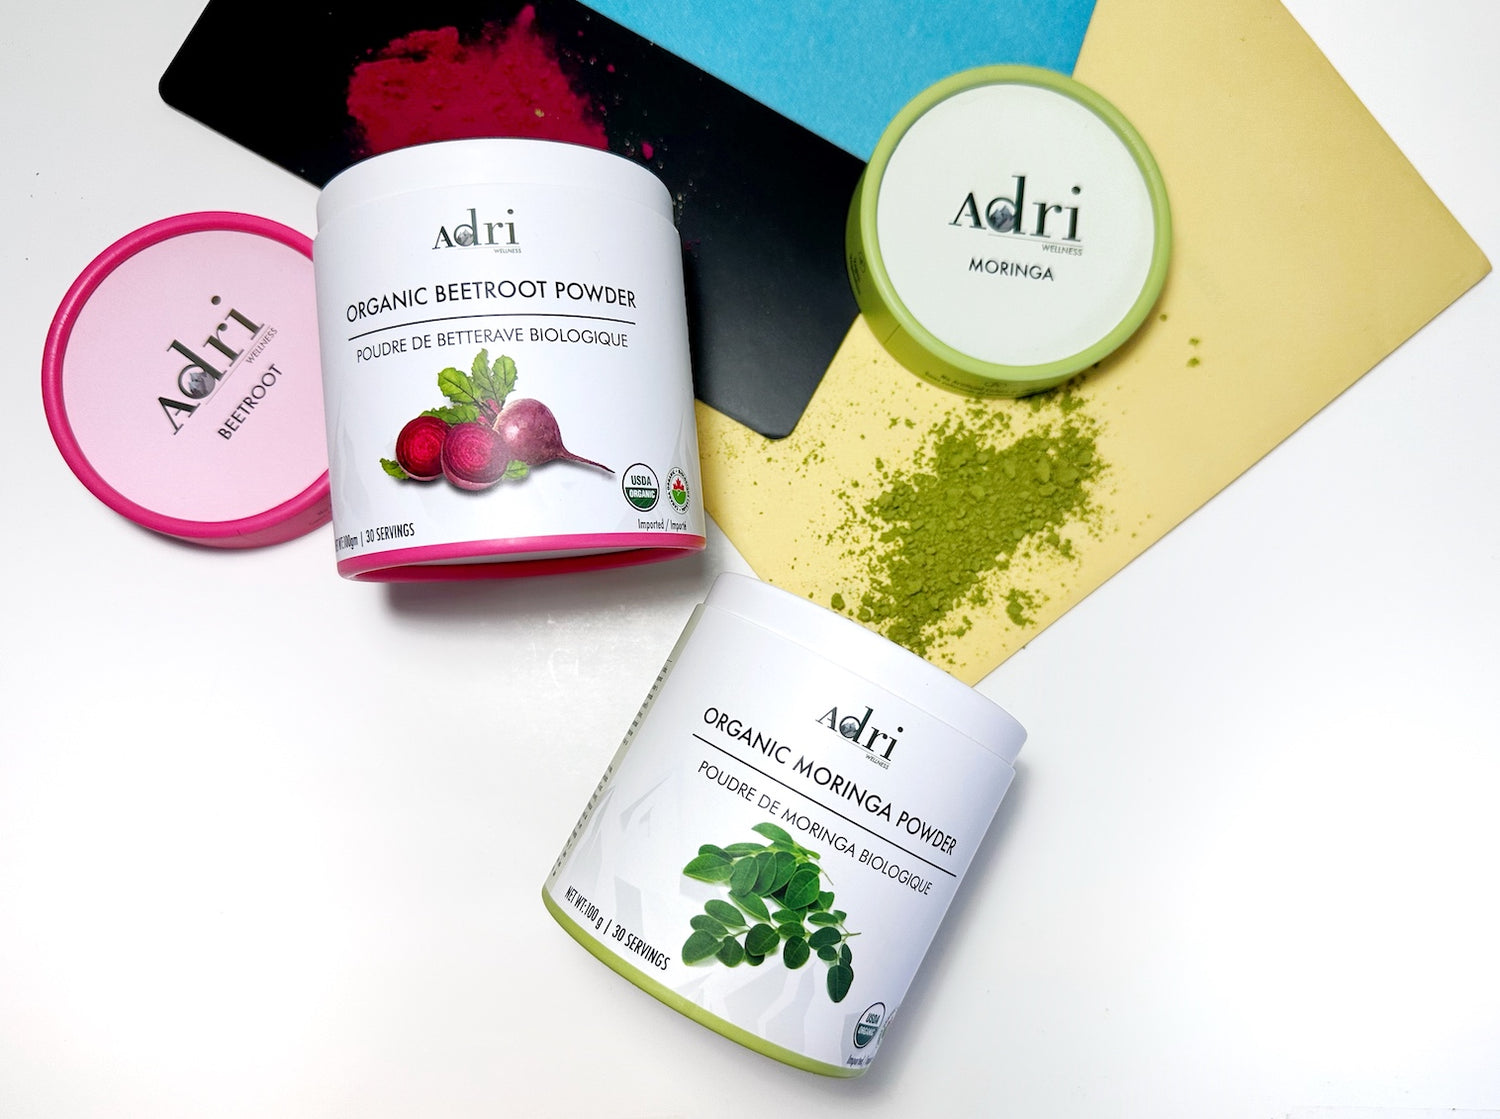 Adri Wellness Moringa and Beetroot powder scattered with their packaging 